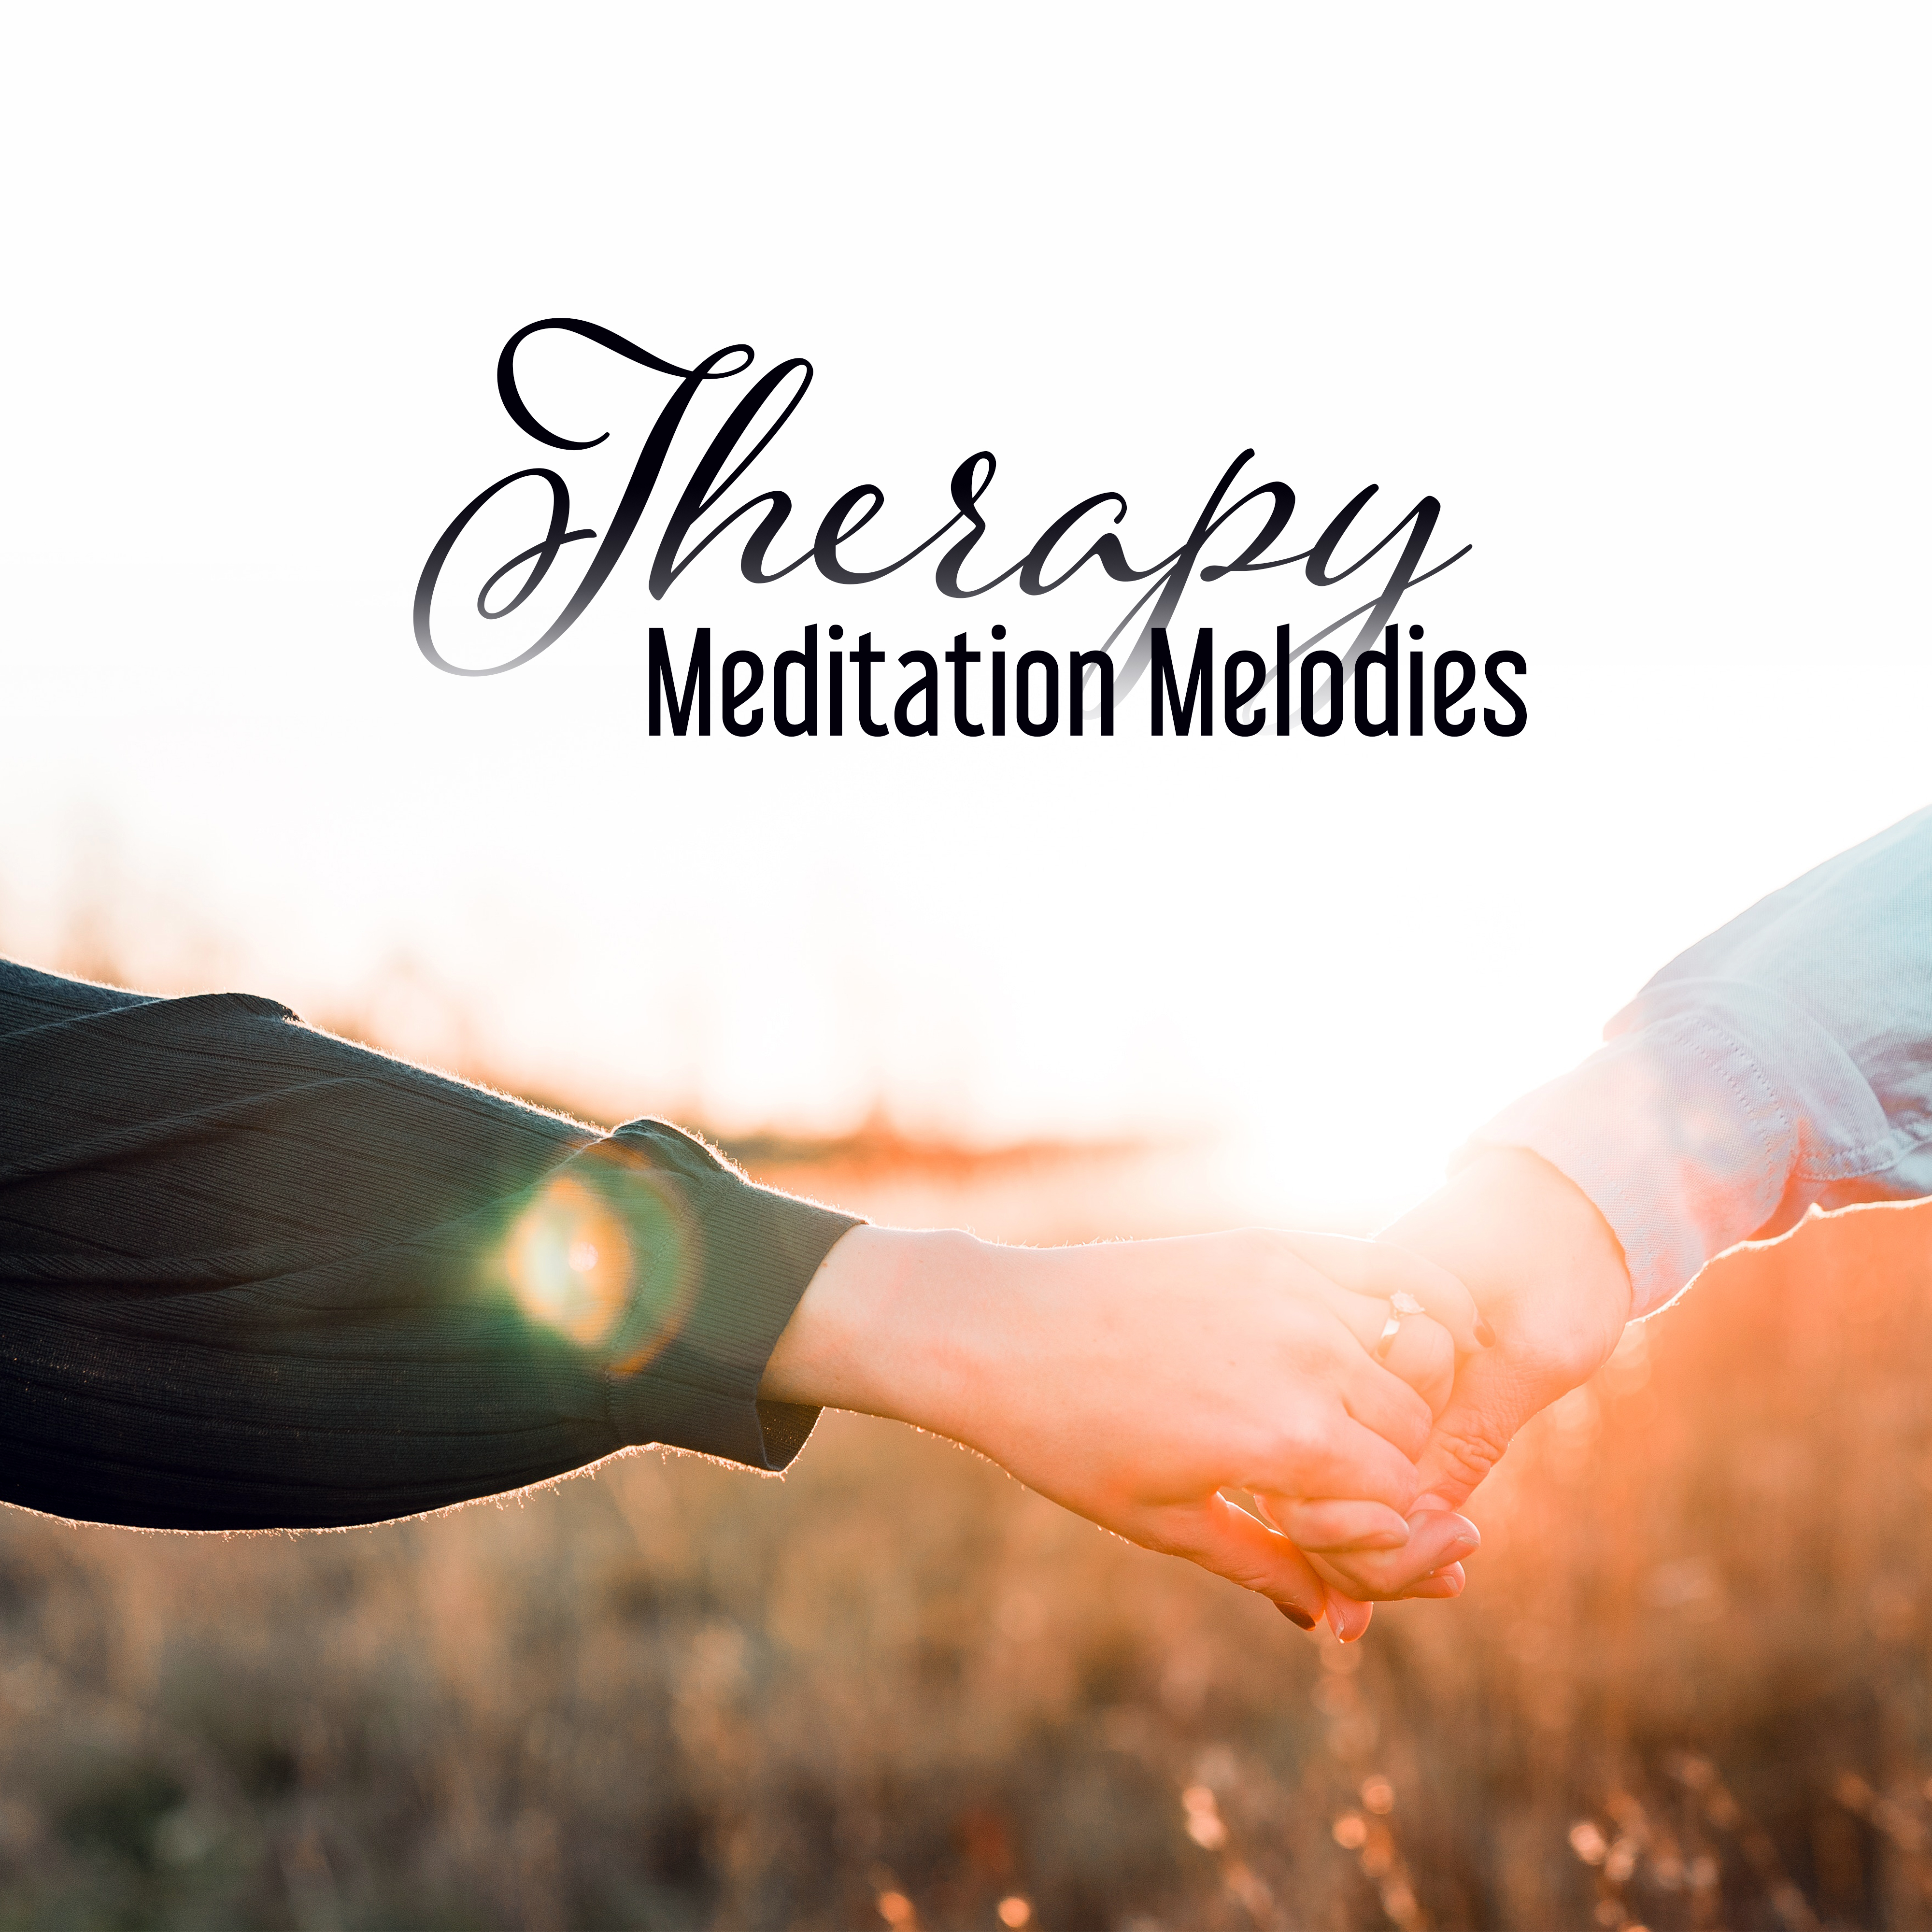 Therapy Meditation Melodies